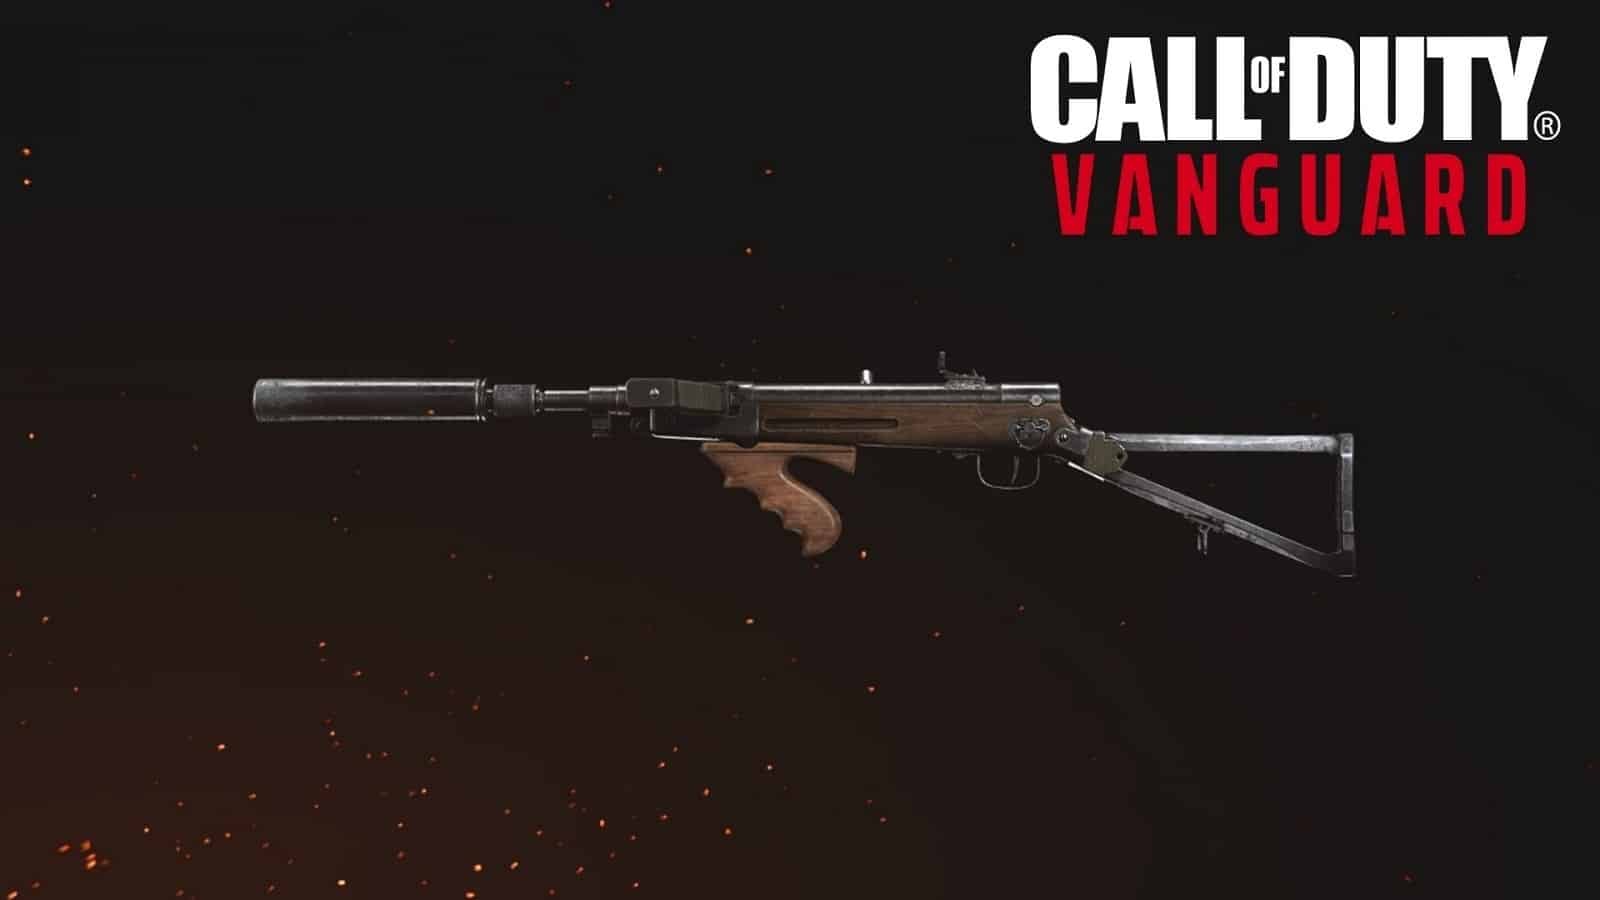 The Type 100 SMG, styled with a black metal and woodgrain stock